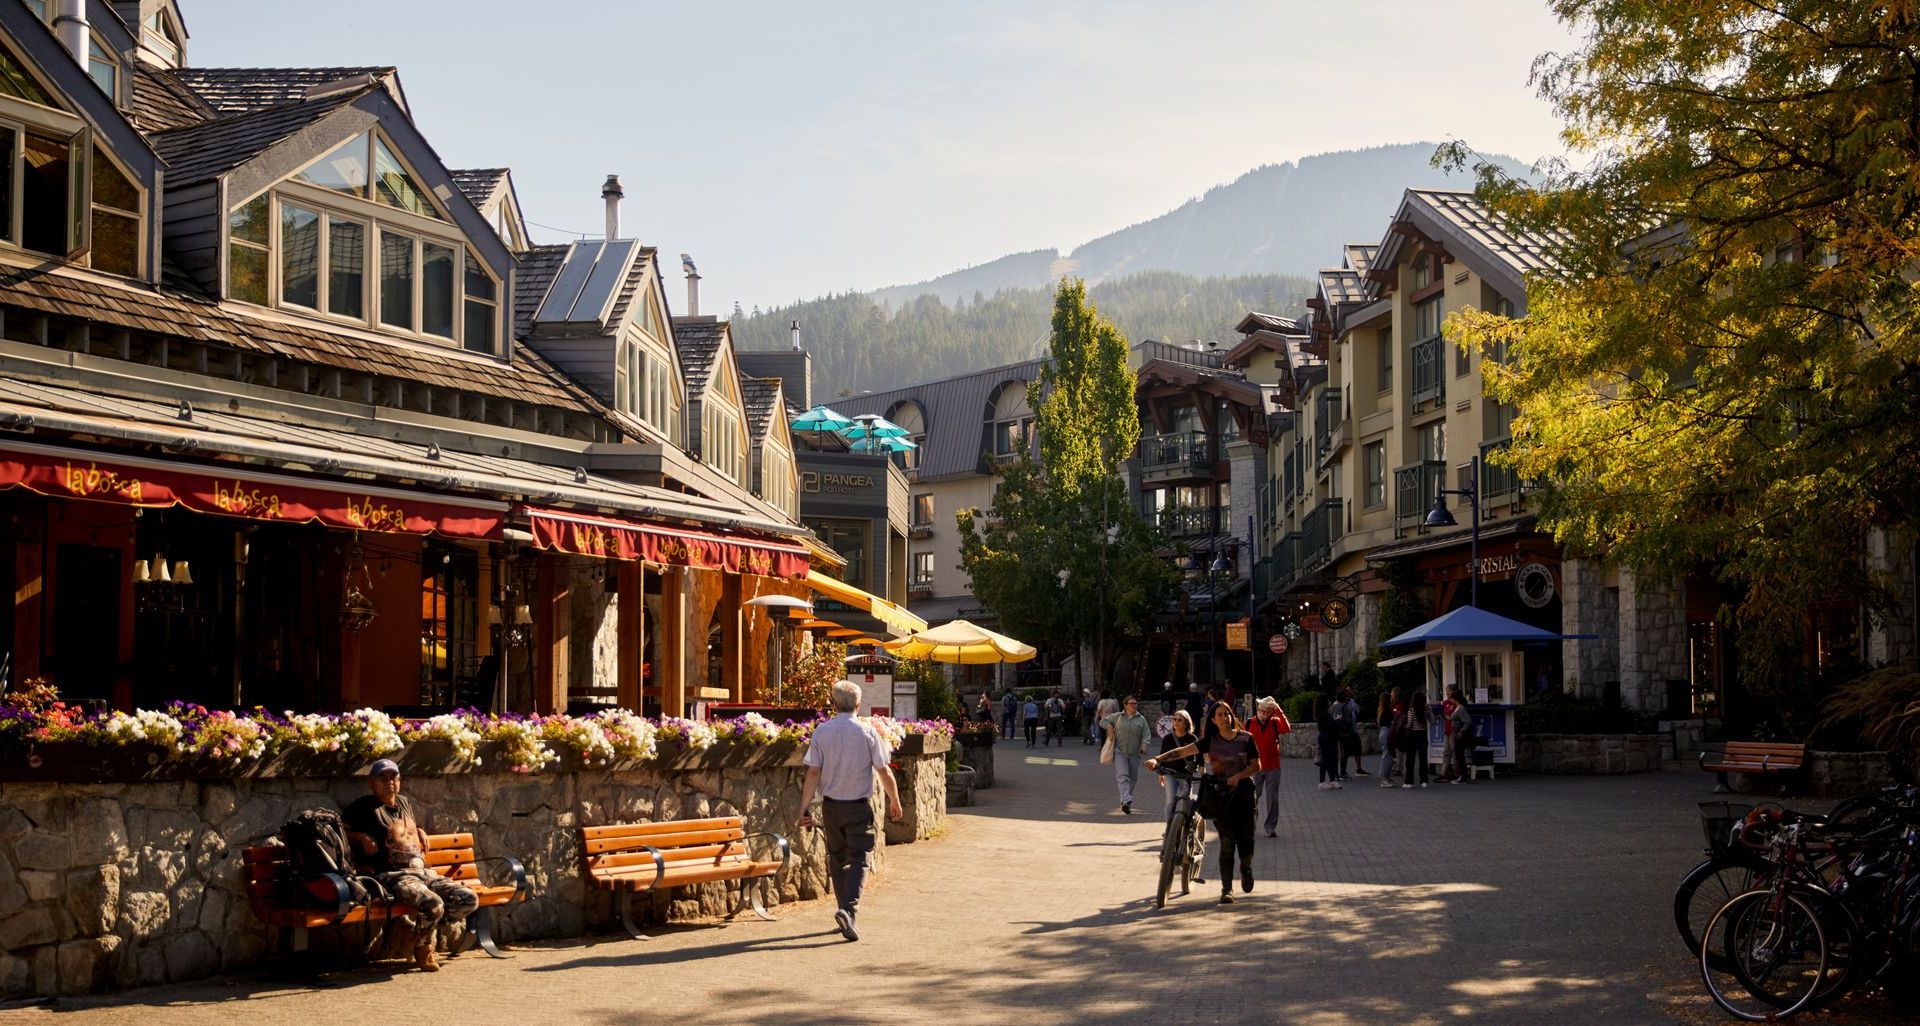 Whistler ‘Just Used to Be a Ski Town.’ Now Buyers Want to Live There Year-Round